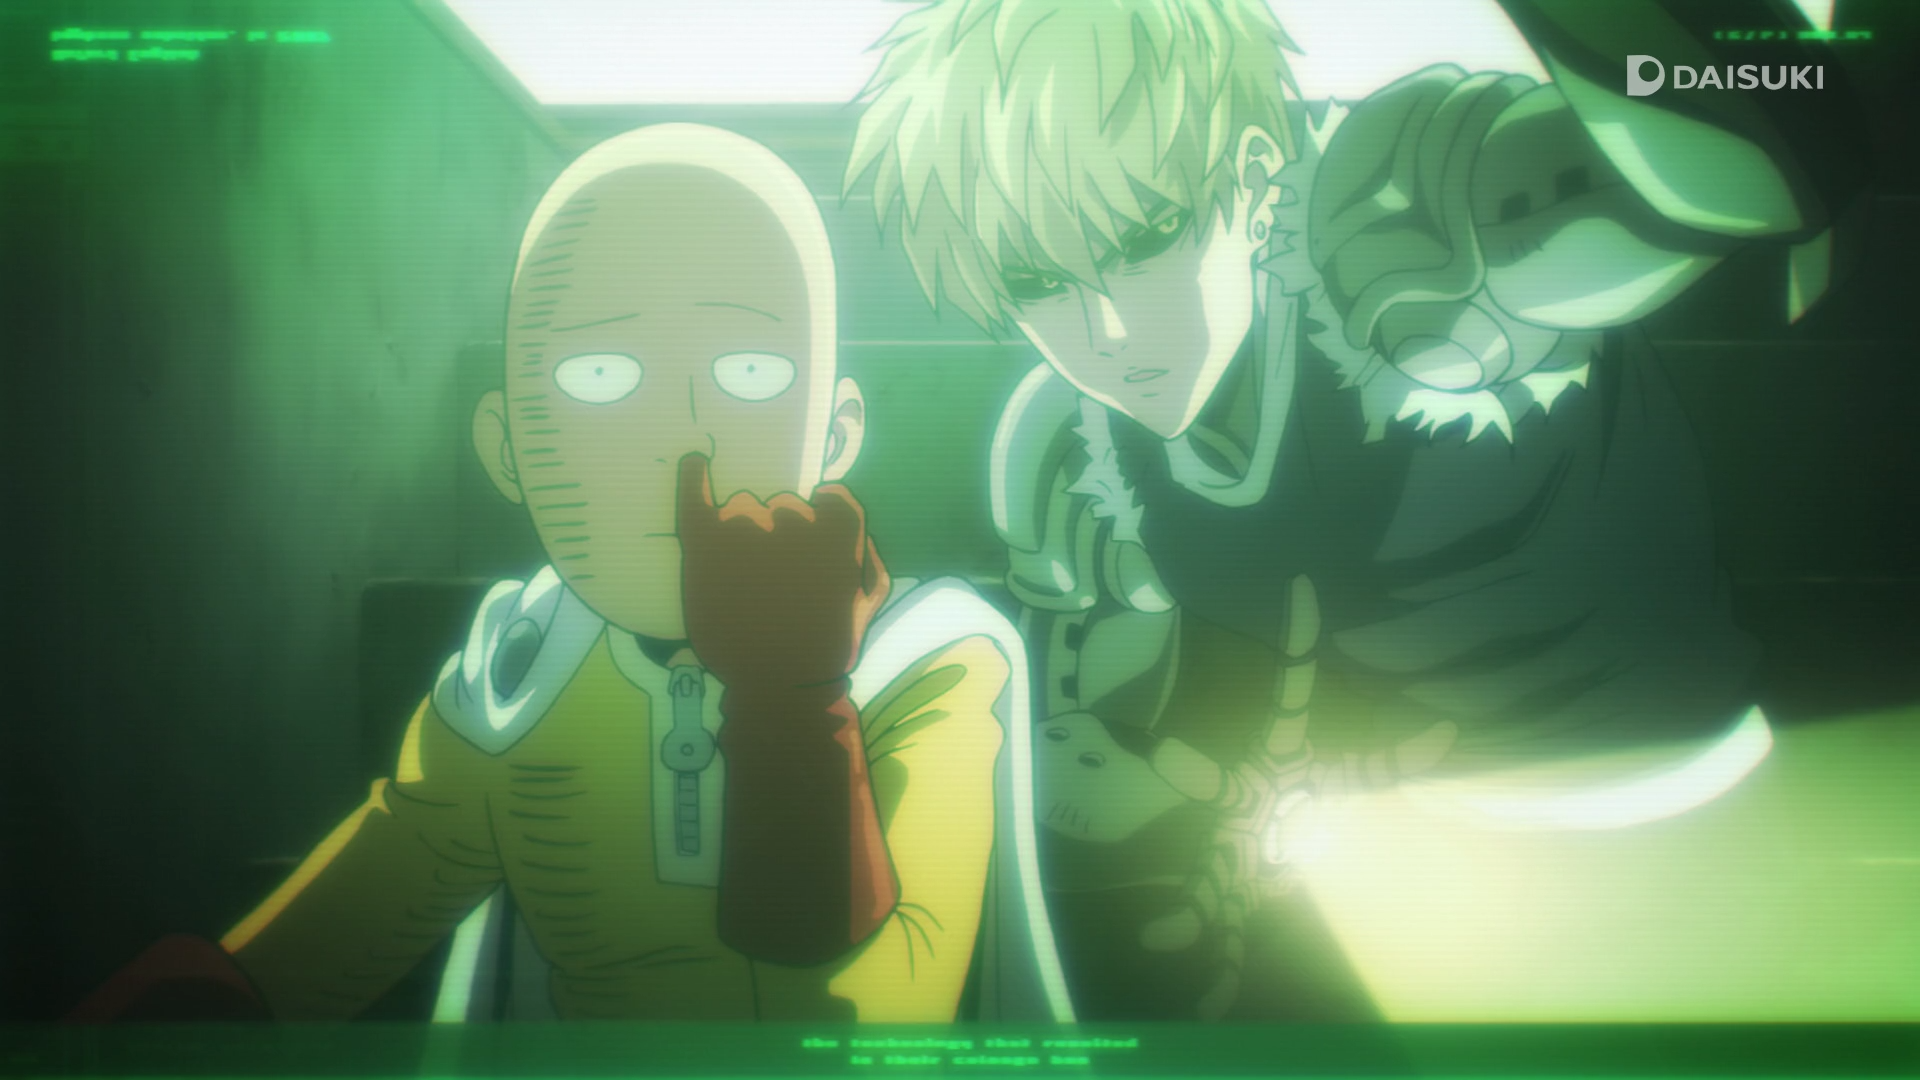 One Punch Man / Episode 3 / Saitama and Genos looking into one of the mad scientist